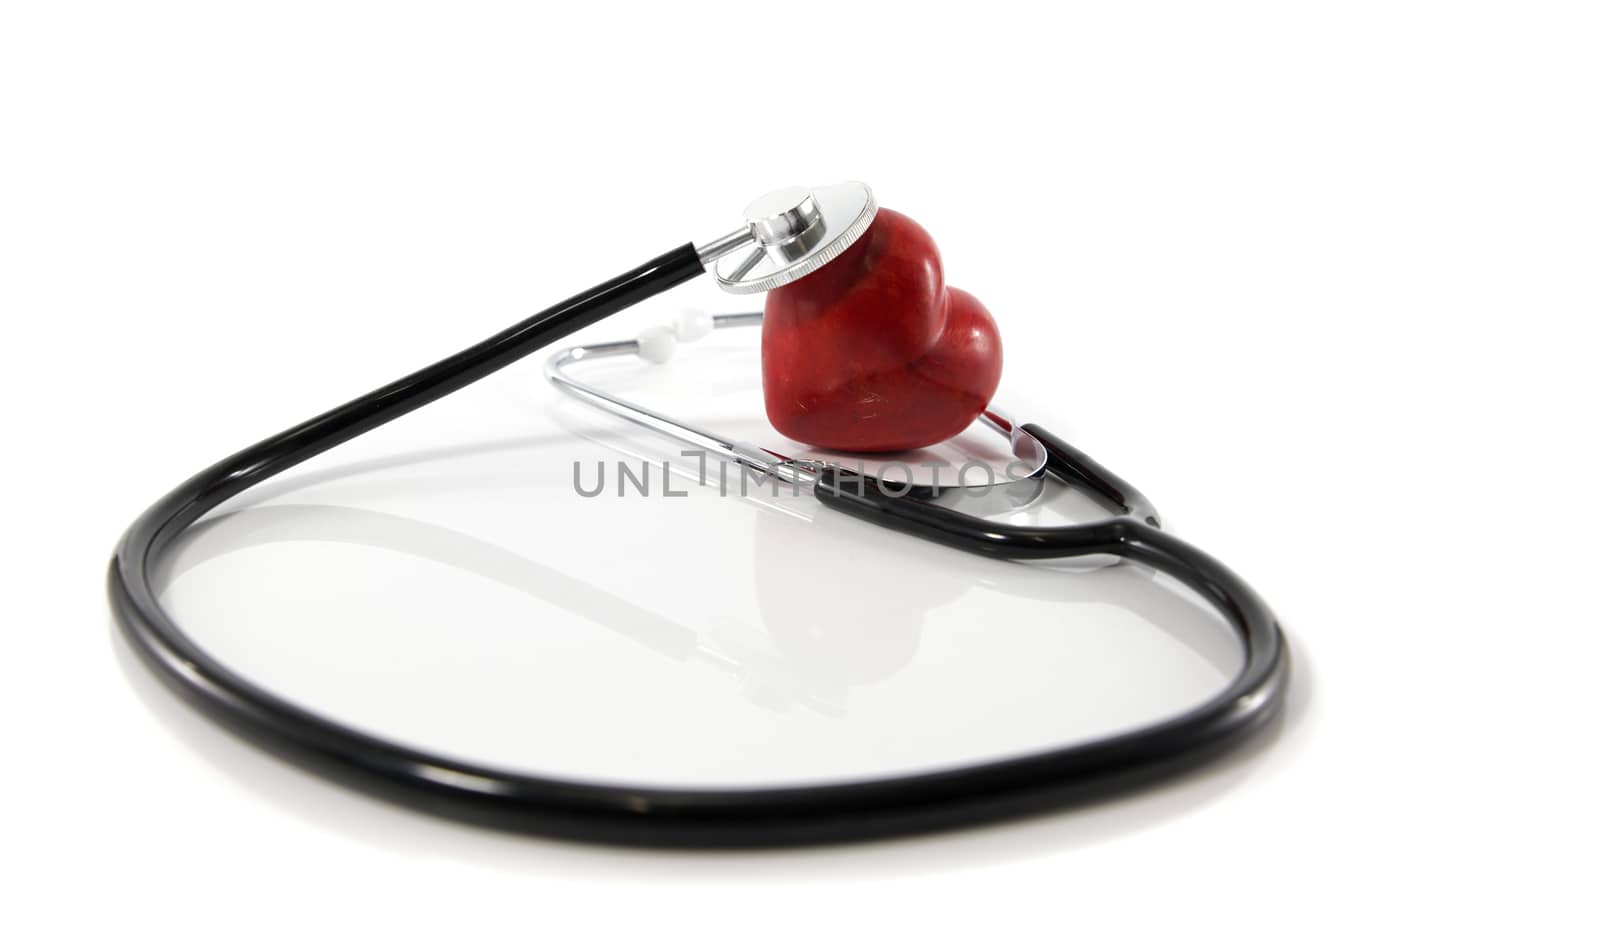 Heart and stethoscope isolated on white background  by compuinfoto